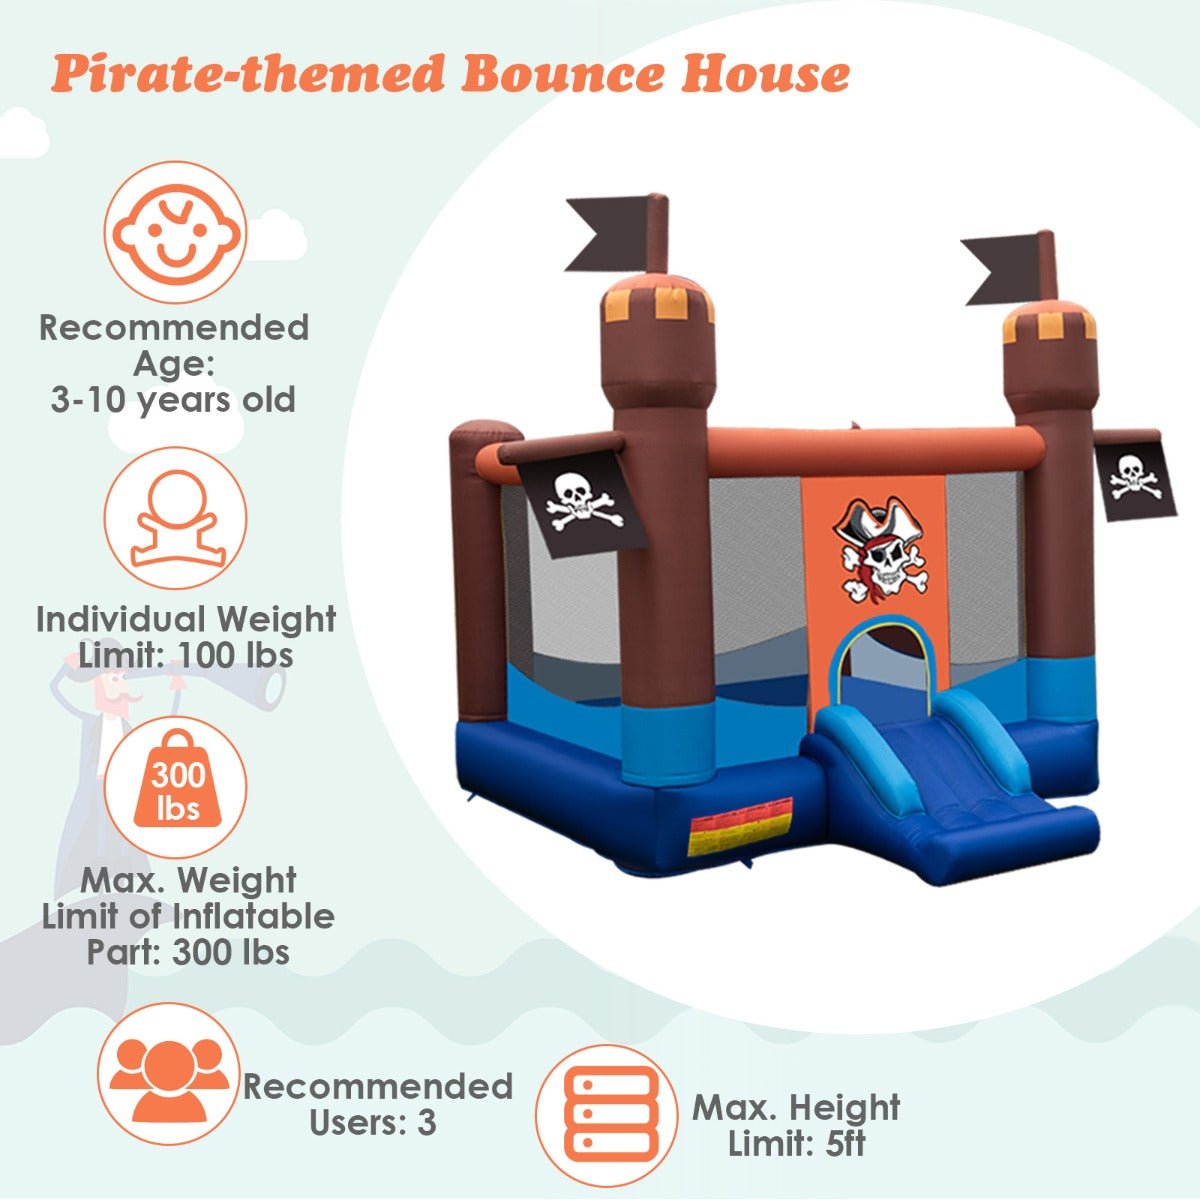 Children's Bouncer Castle - Bounce, Shoot Hoops, and Play Outside